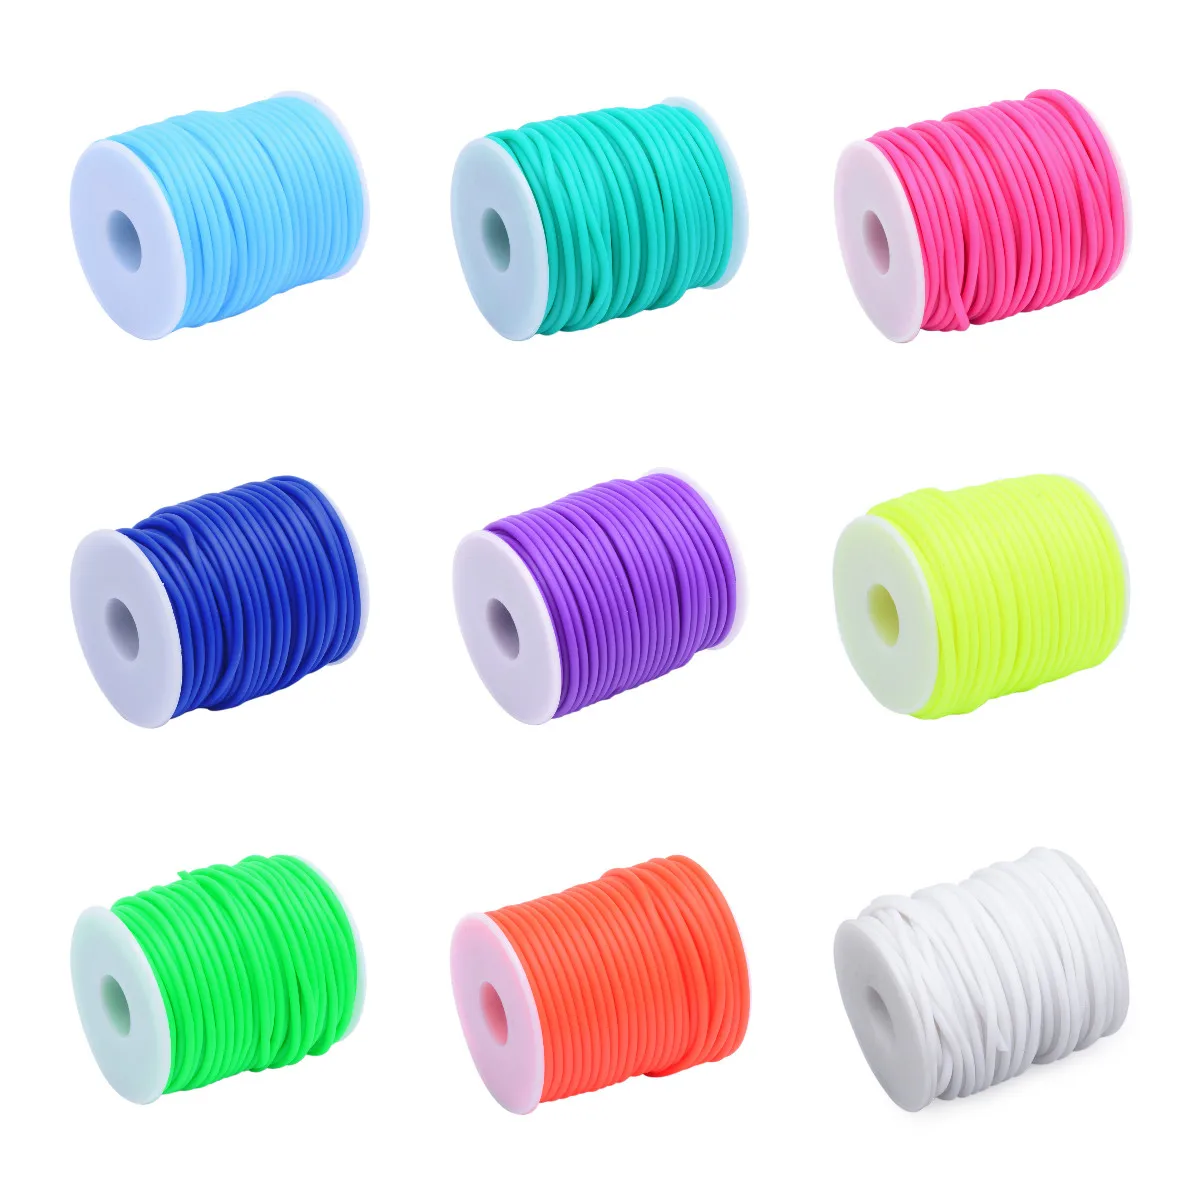 2mm 3mm 4mm Hollow Pipe PVC Tubular Synthetic Rubber Cord with Plastic Spool for Jewelry Making Bracelet Necklace Accessories